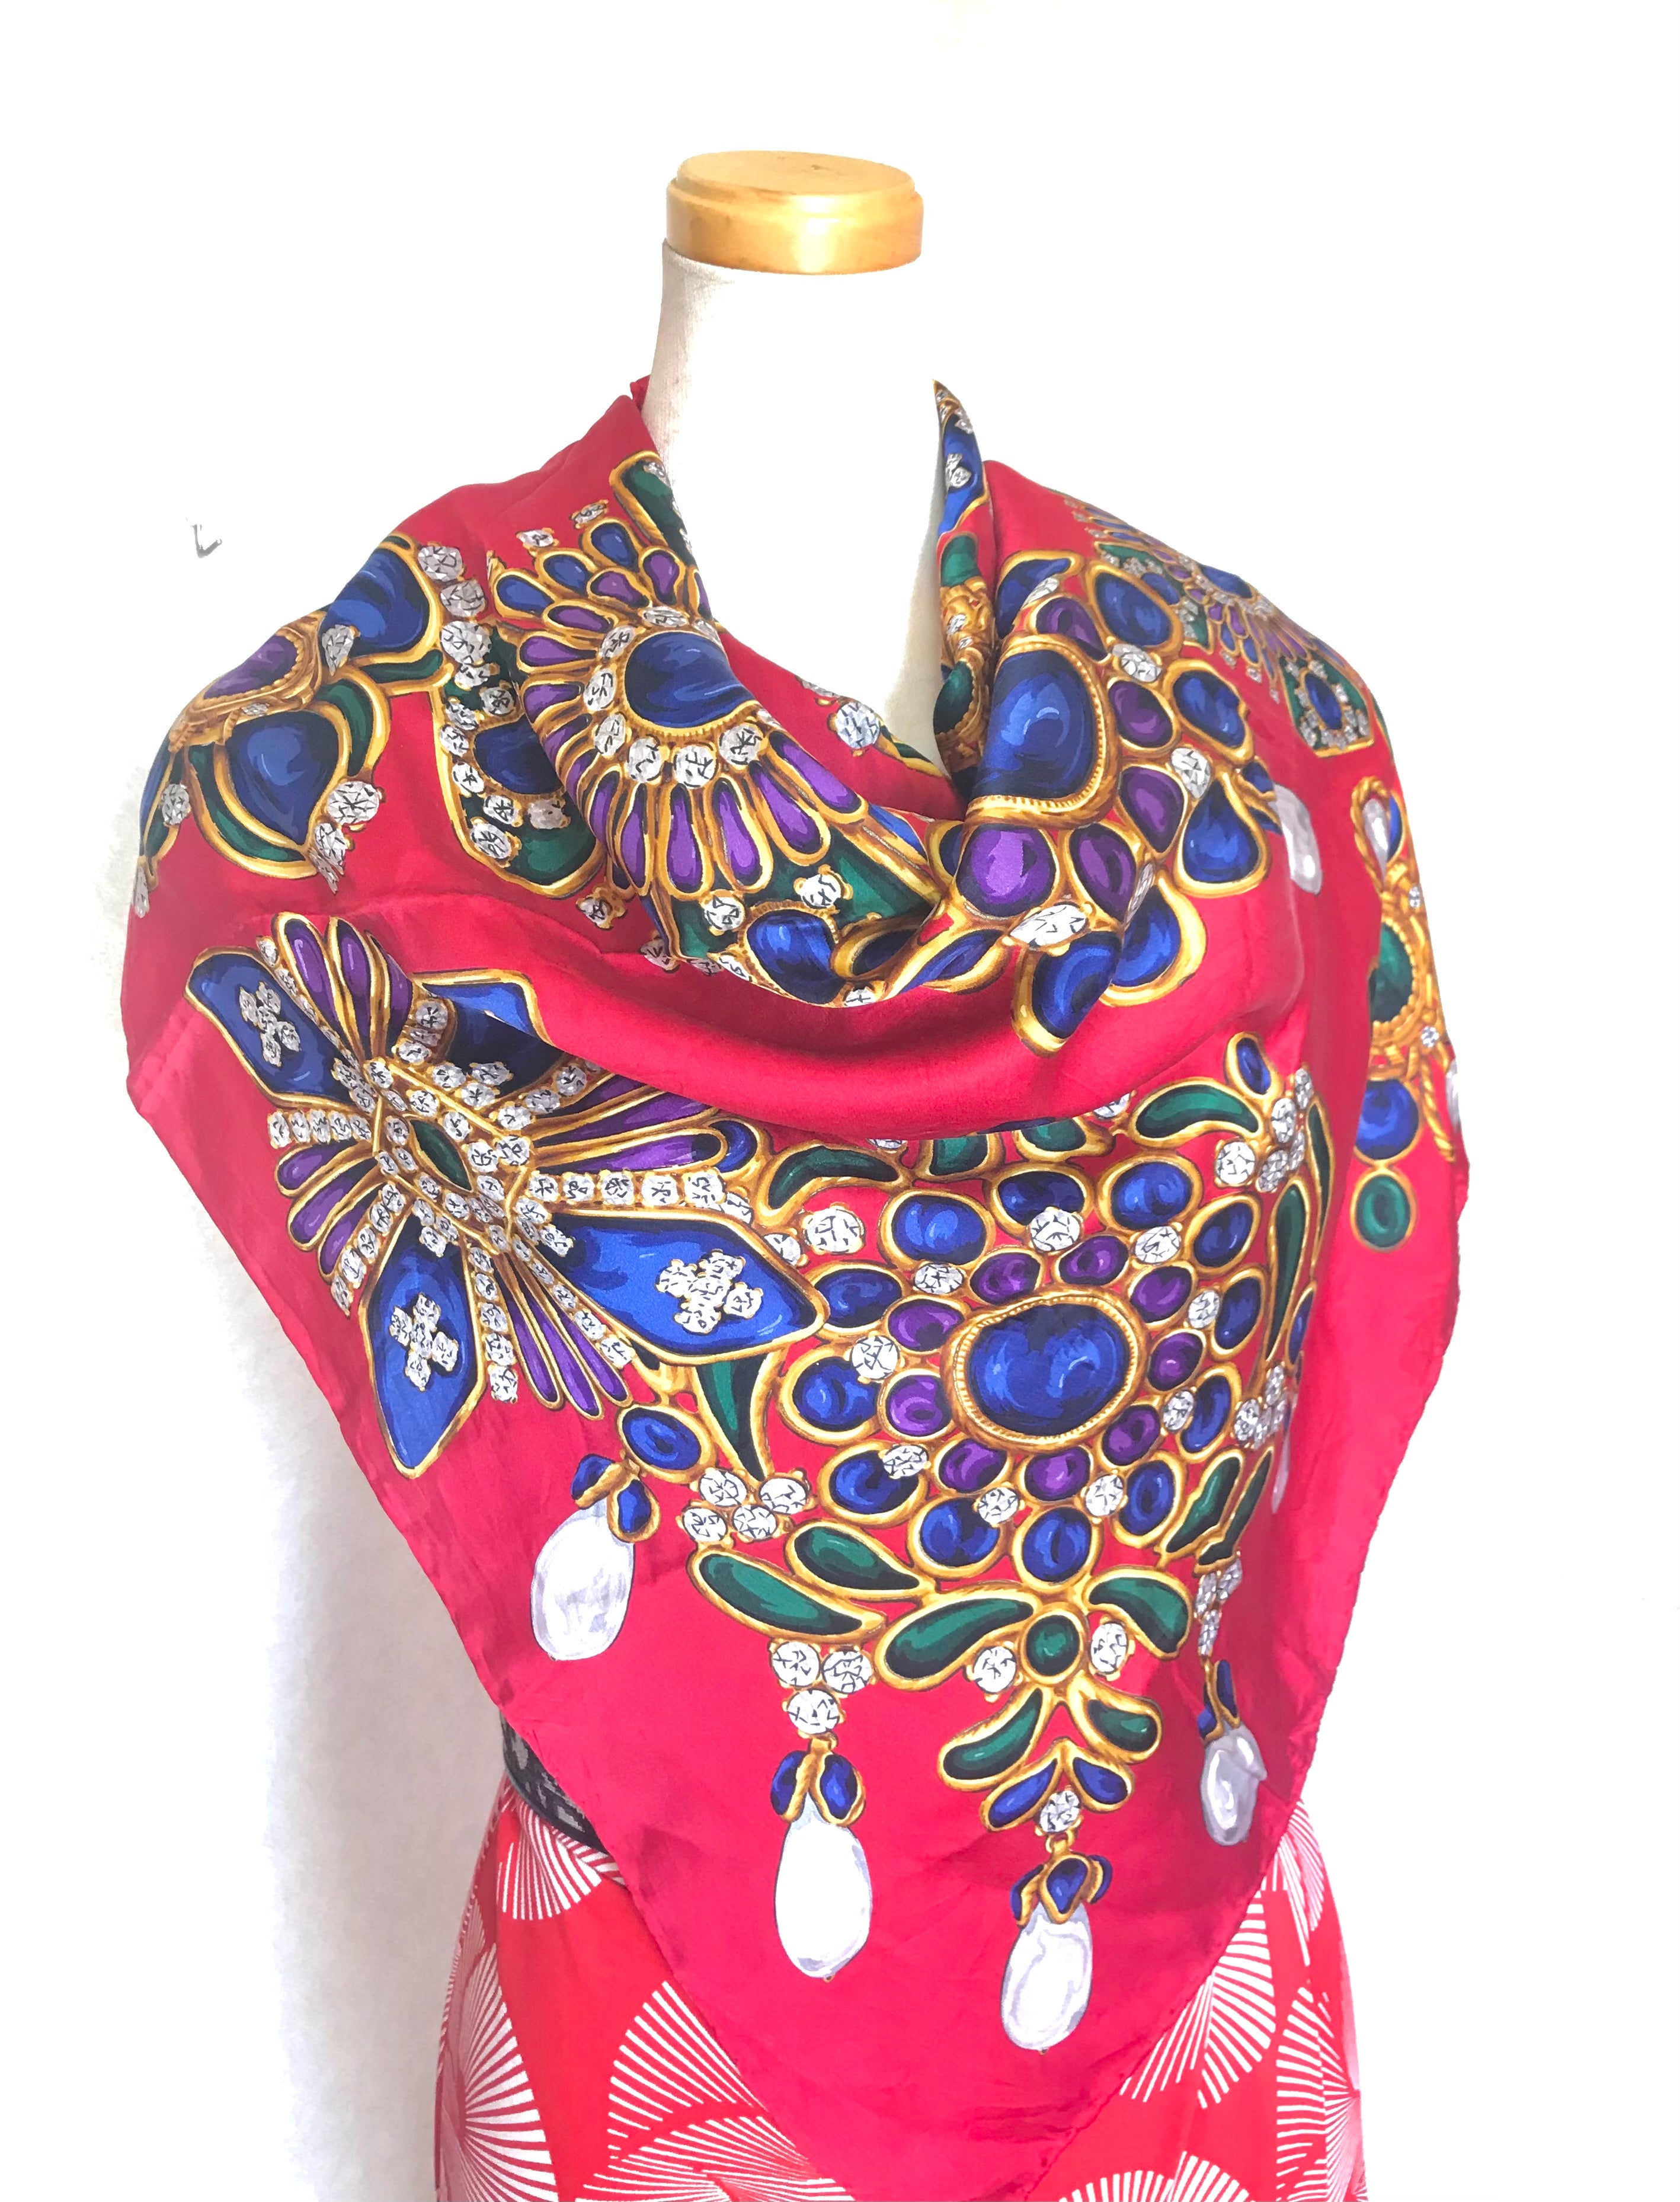 Vintage Chanel red scarf with gold, blue, green, colorful gripoix